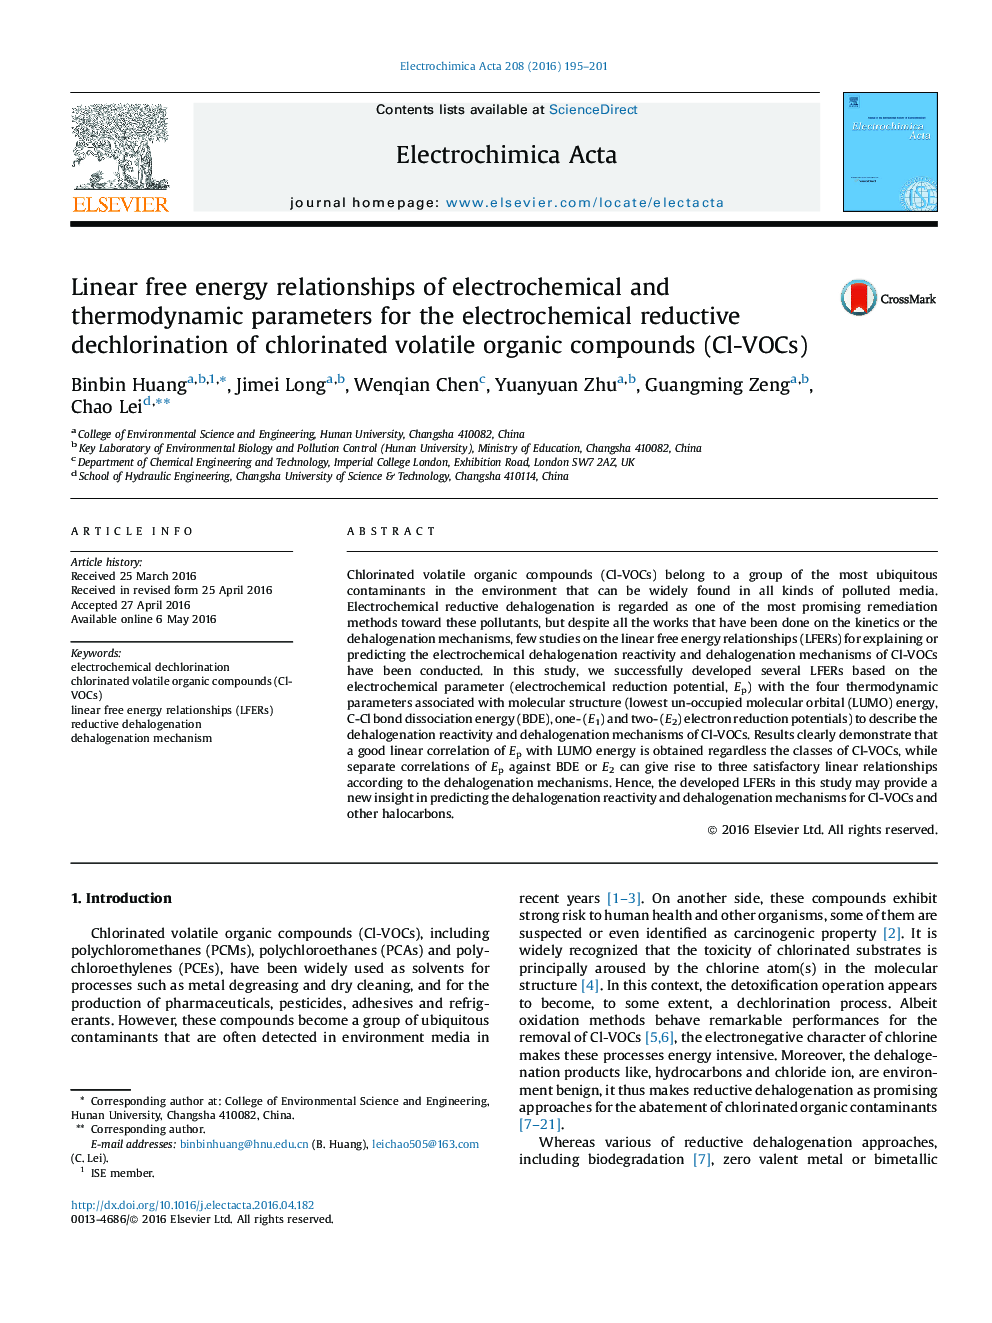 Linear free energy relationships of electrochemical and thermodynamic parameters for the electrochemical reductive dechlorination of chlorinated volatile organic compounds (Cl-VOCs)